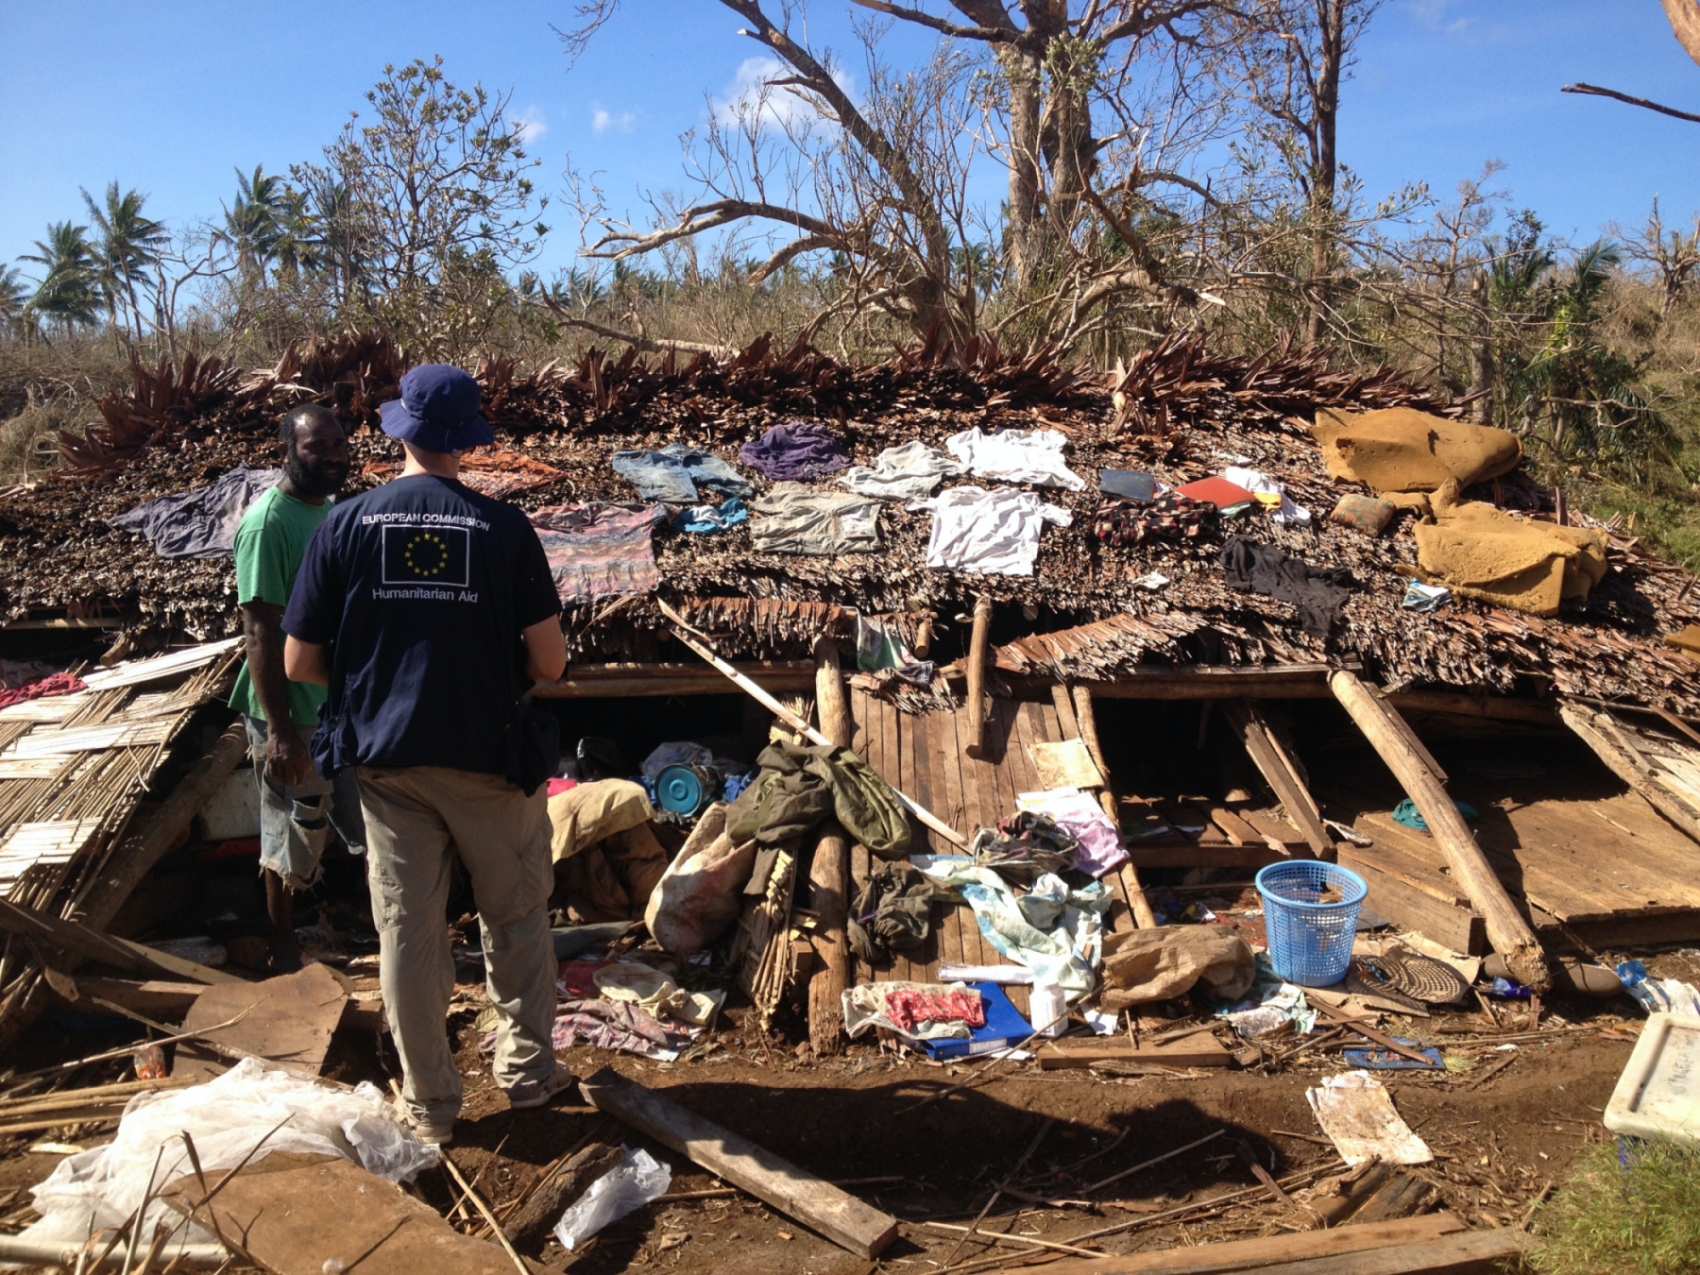 Staff from the EU Civil Protection and Humanitarian Aid assess the damage caused by Cyclone Pam to Vanuatu in 2015 (Source: EC/ECHO/Flickr)